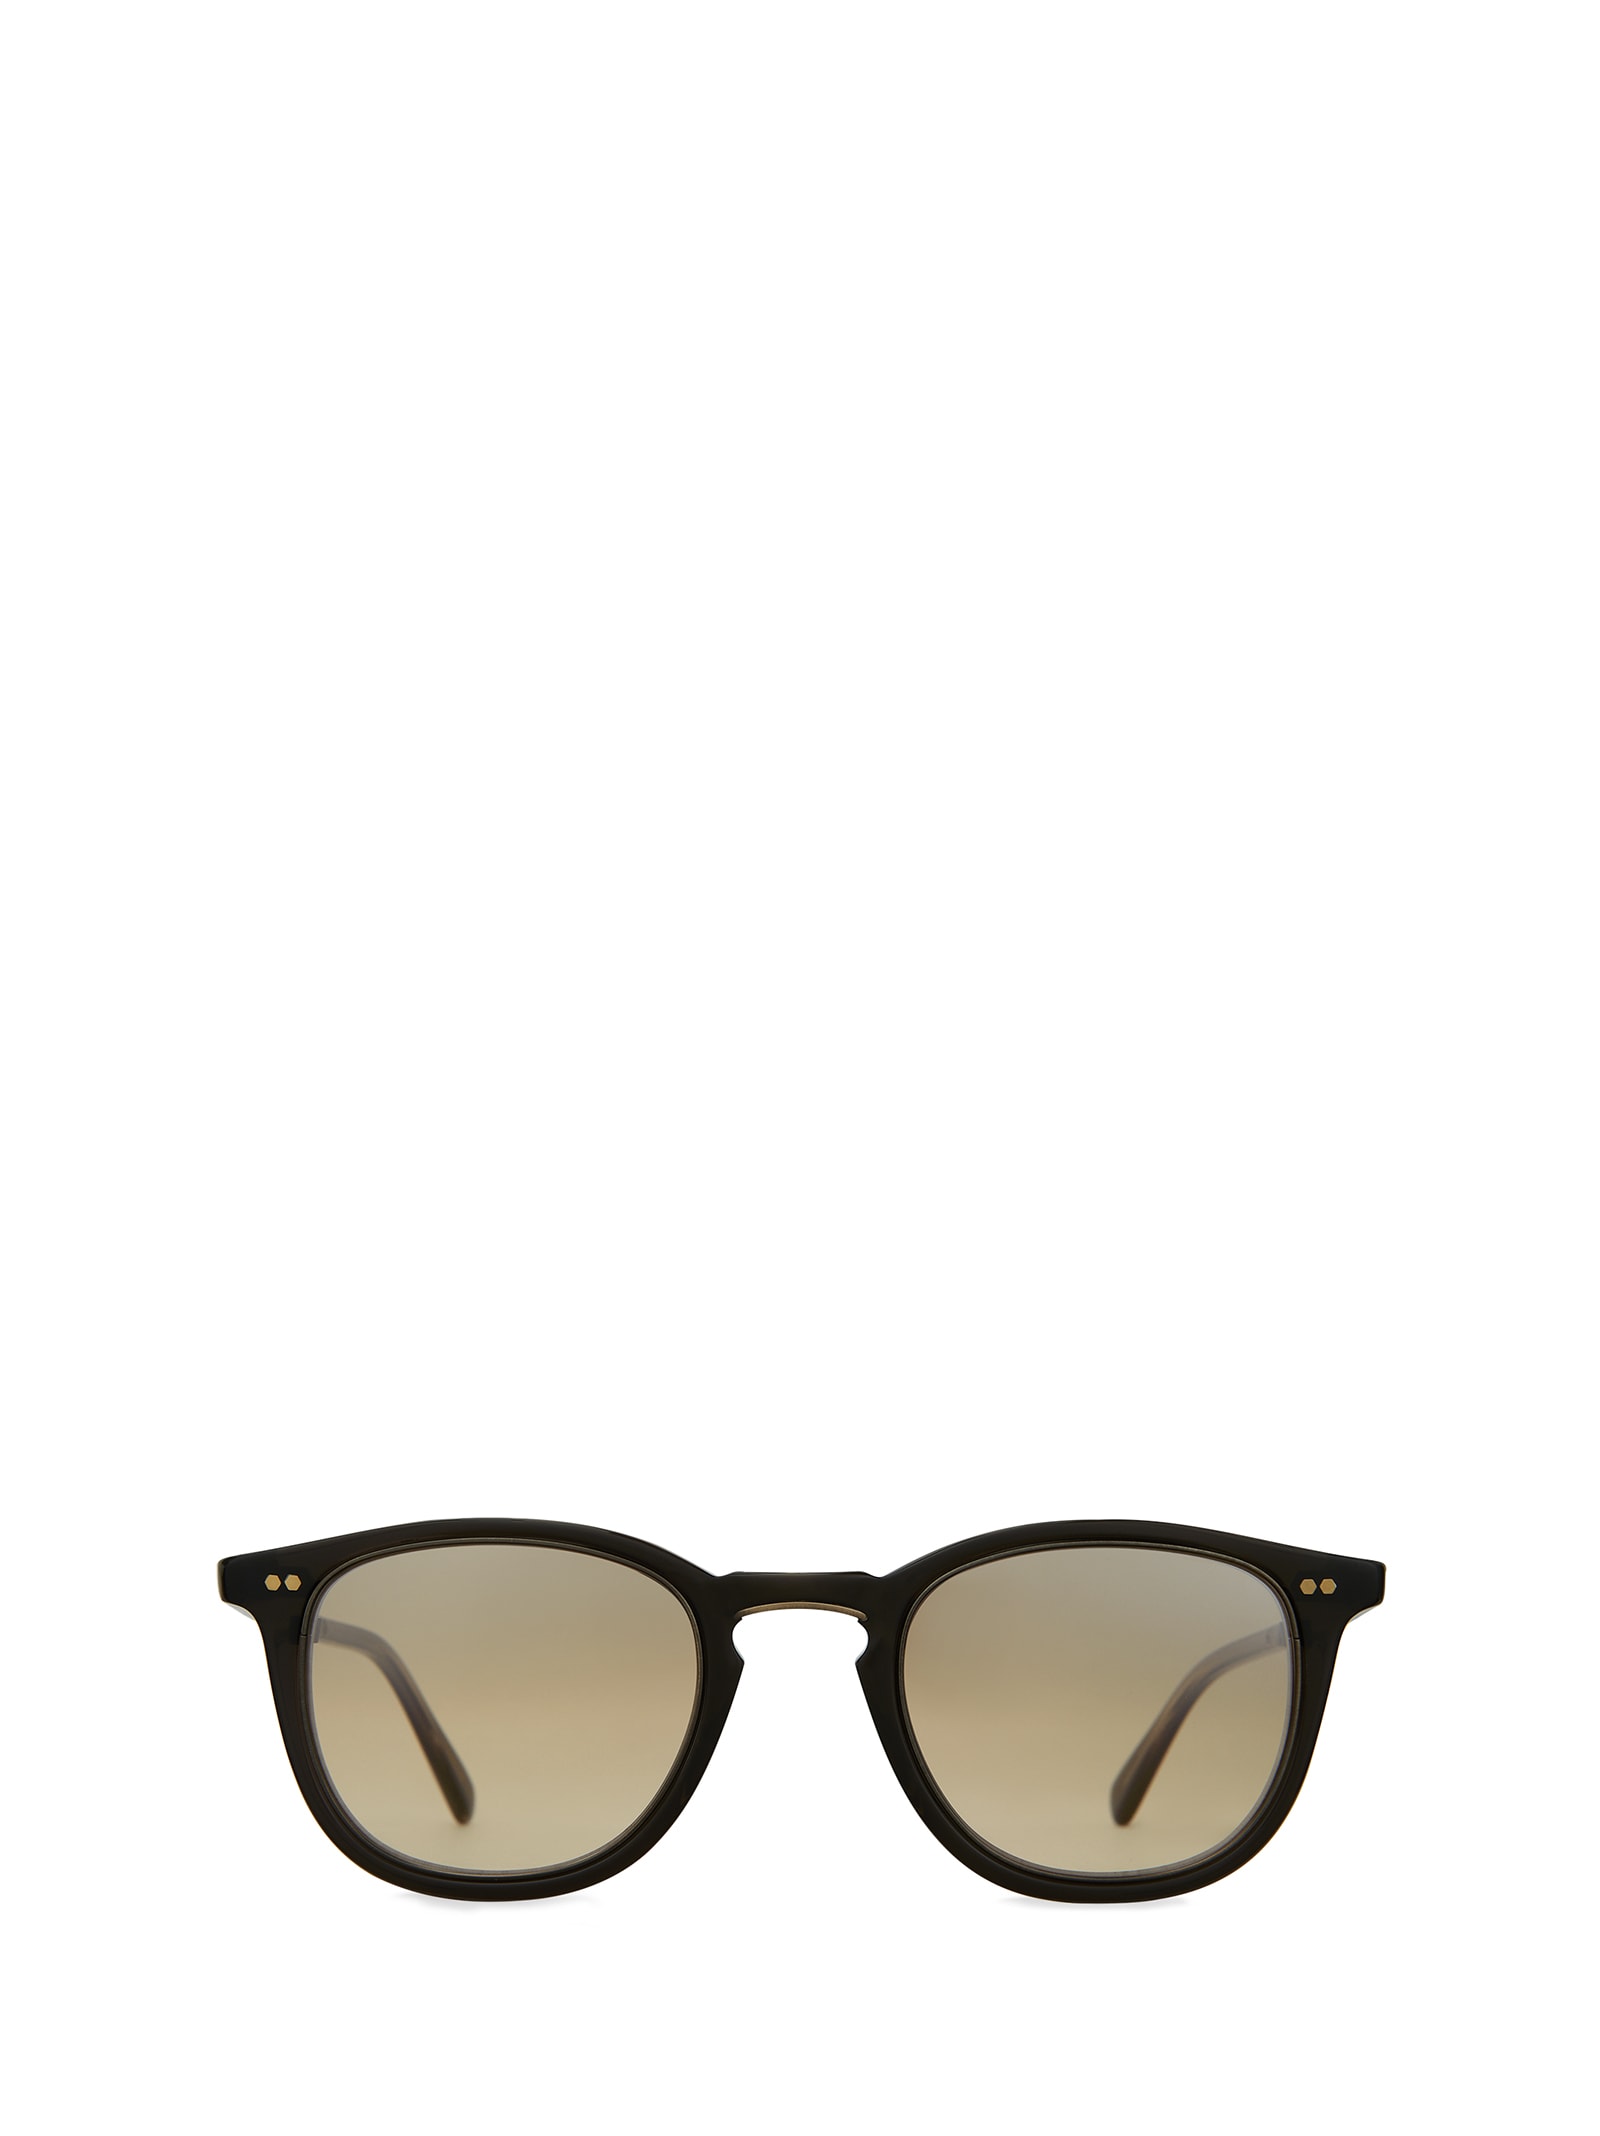 MR LEIGHT COOPERS S BLACK TAR - ANTIQUE GOLD SUNGLASSES